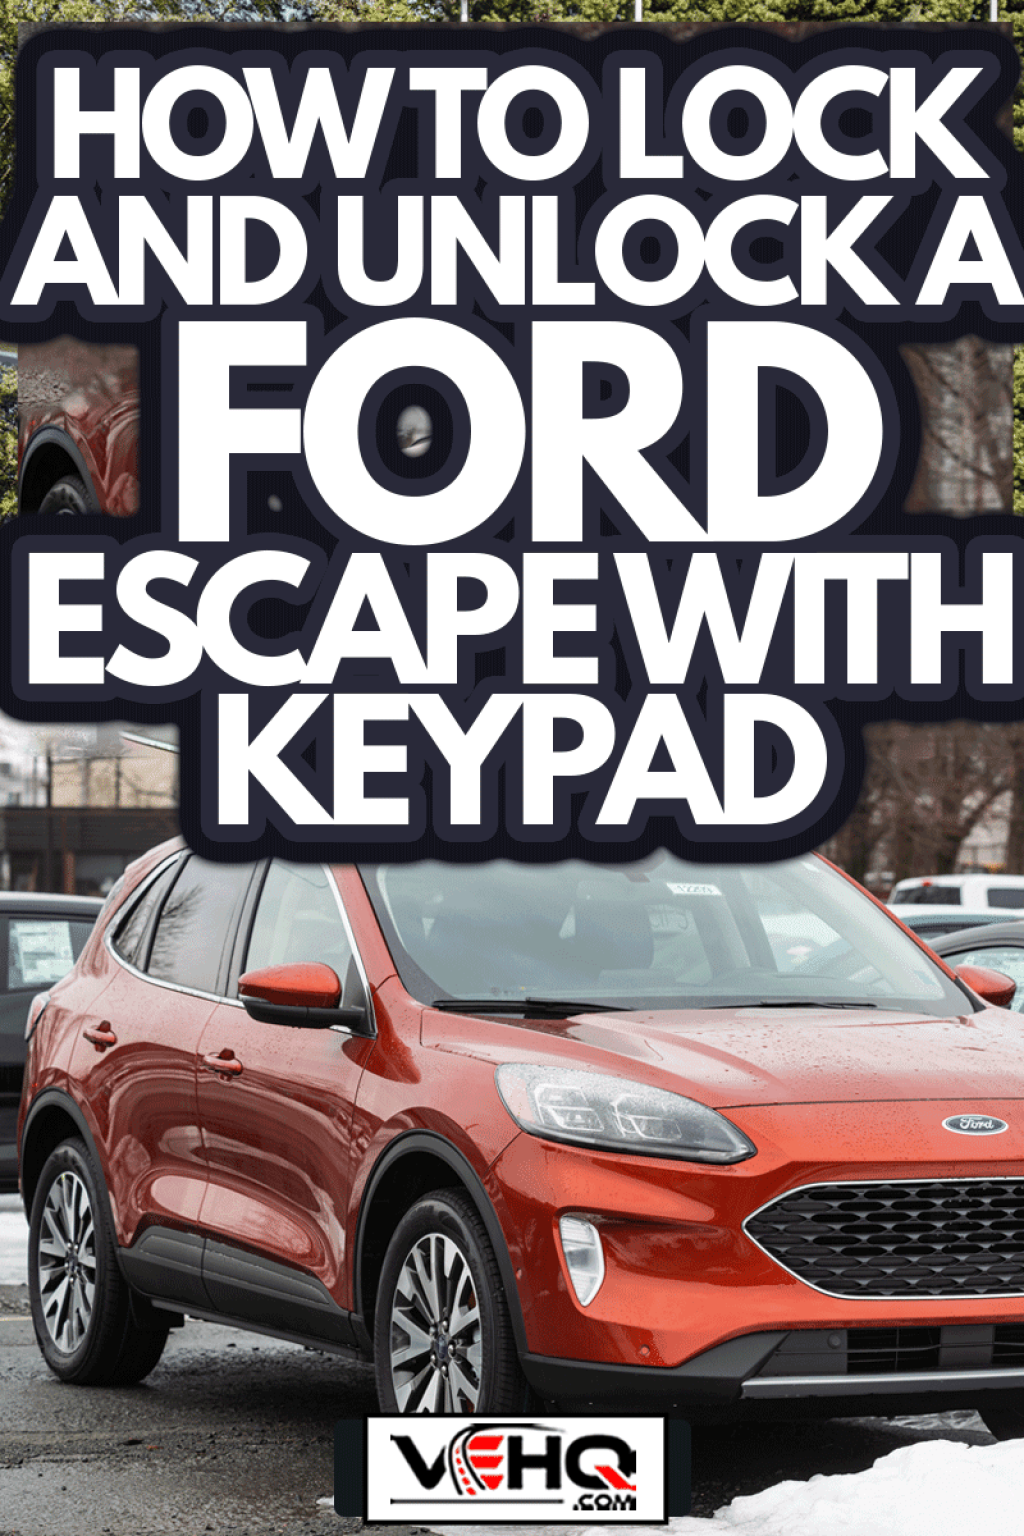 Picture of: How To Lock And Unlock A Ford Escape With Keypad